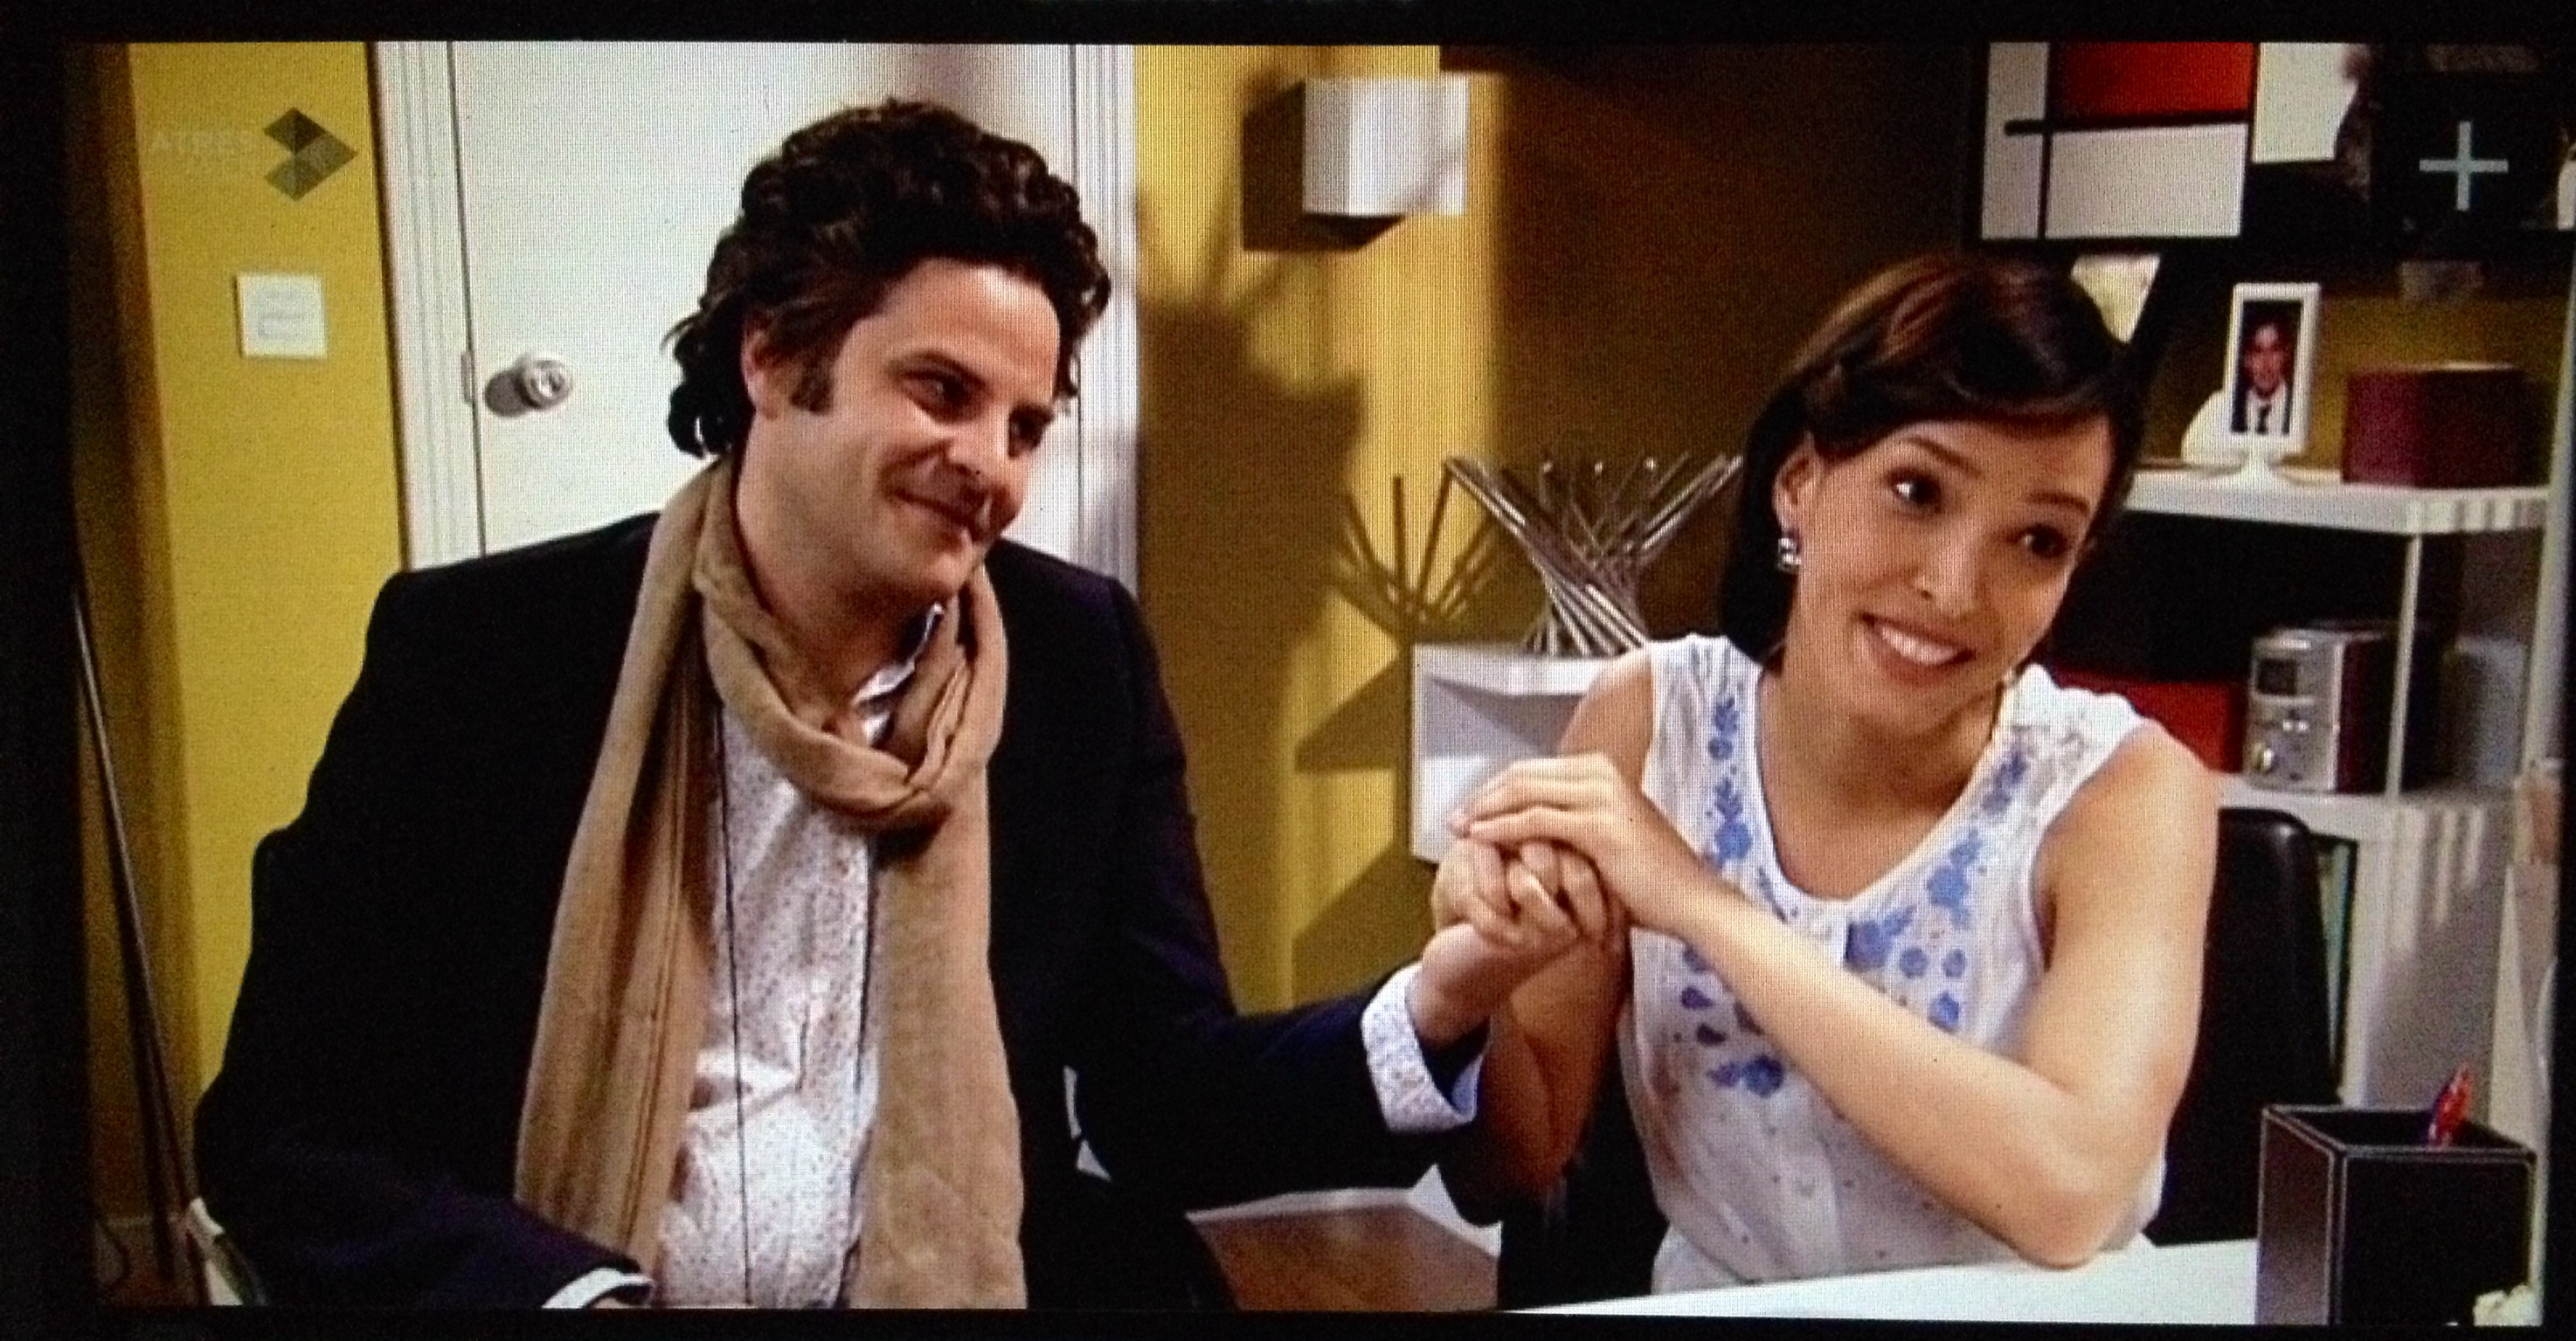 Still of Arlette Torres and Raul Cimas in Museo Coconut (TV Series).